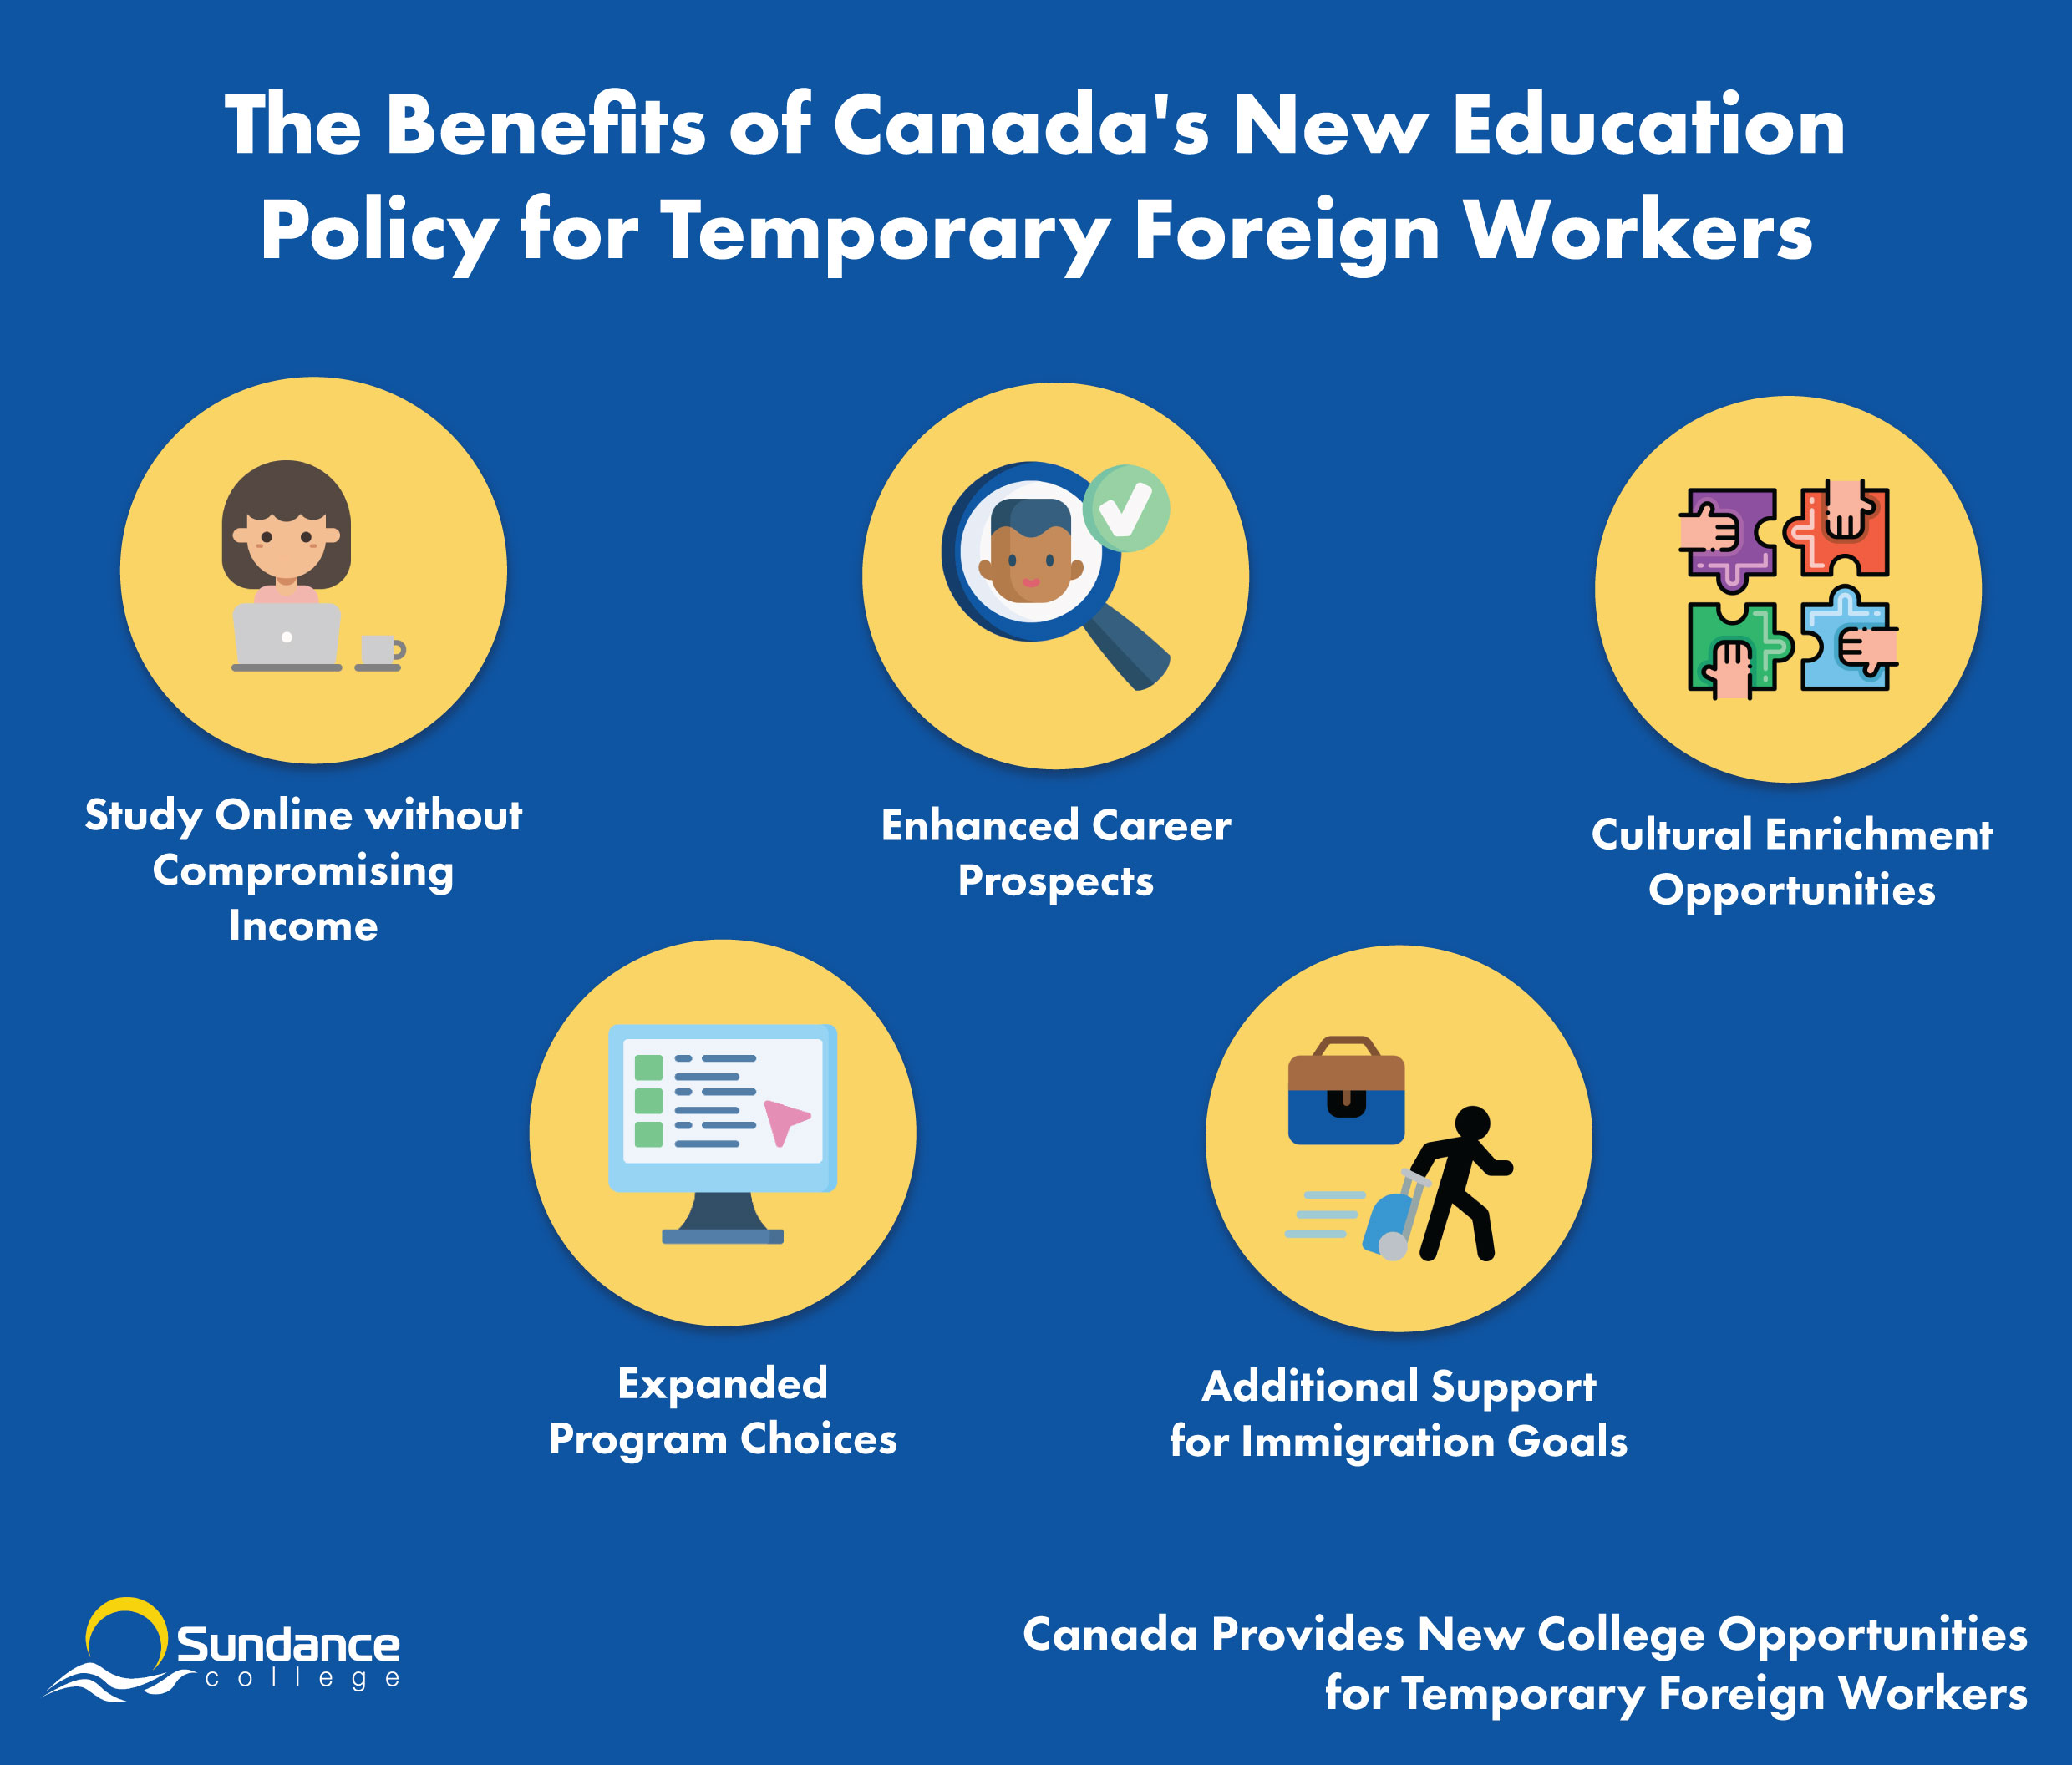 The infographic made by Sundance College that showcases the benefits of Cahadian new educational policy for temporary foreign workers including uninterrupted Studies without Compromising Income, Expanded Program Choice, Enhanced Career Prospects, Additional Support for Immigration Goals, Cultural Enrichment Opportunities.